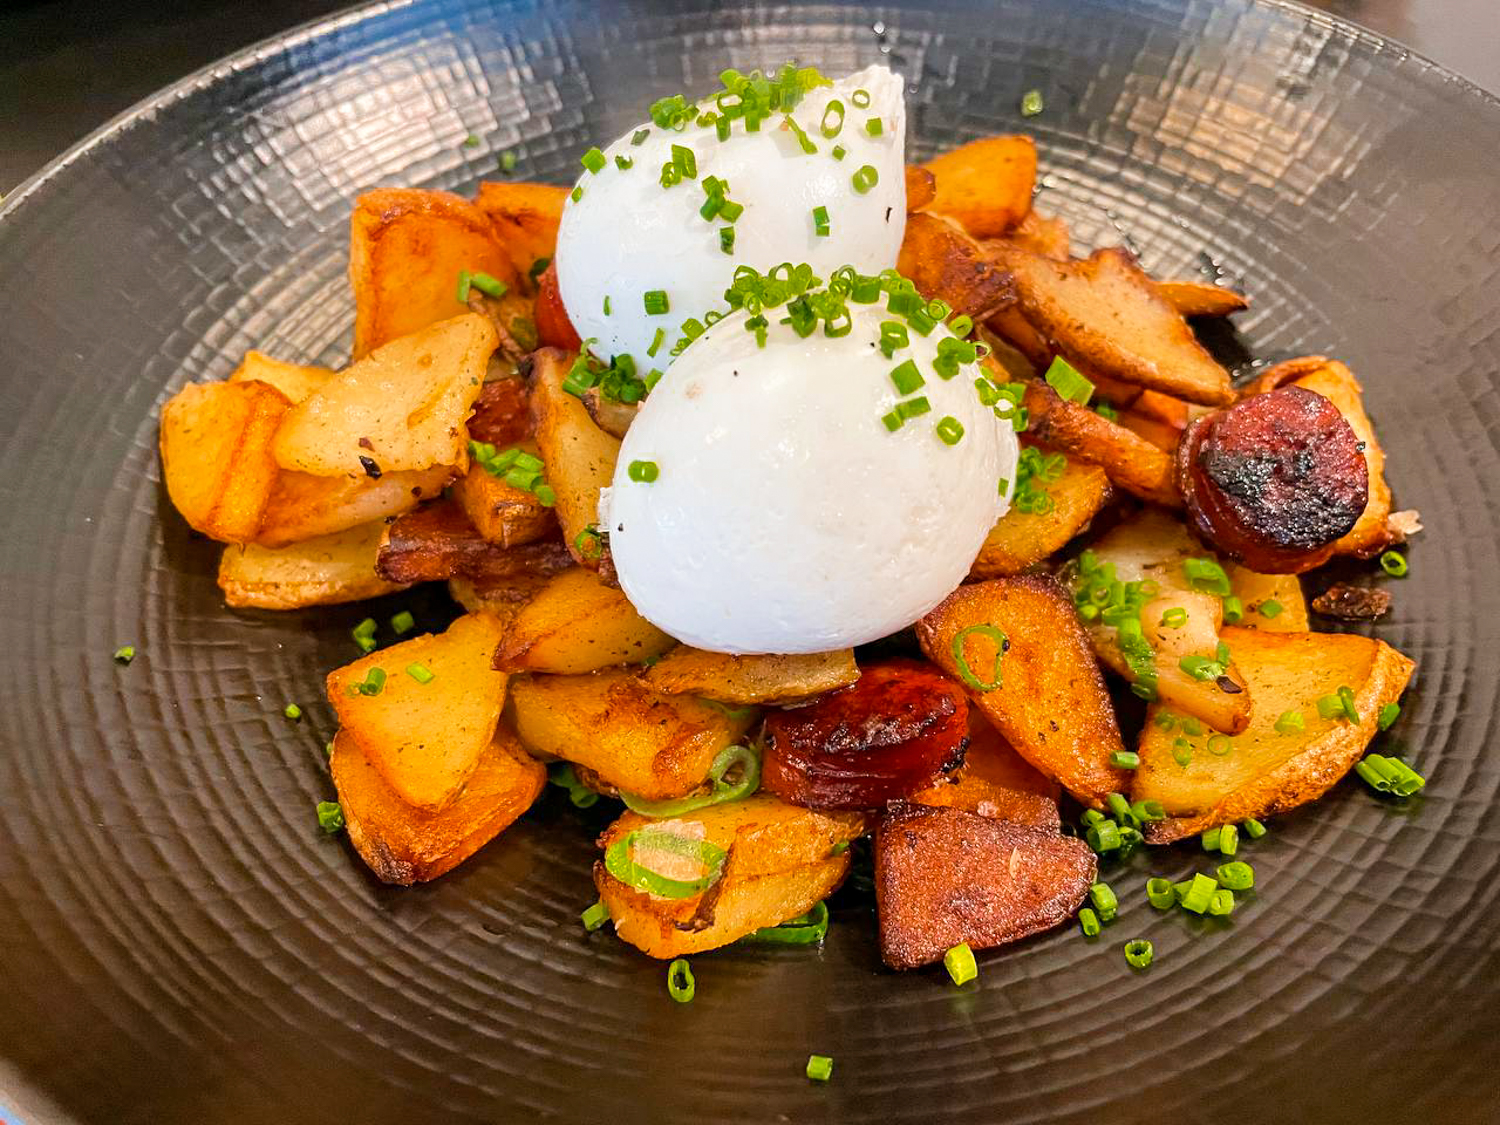 A large ceramic plate is filled with a thick layer of roasted potatoes. Charred chorizo, two poached eggs, and a hefty portion of spring onions rest on top of them.